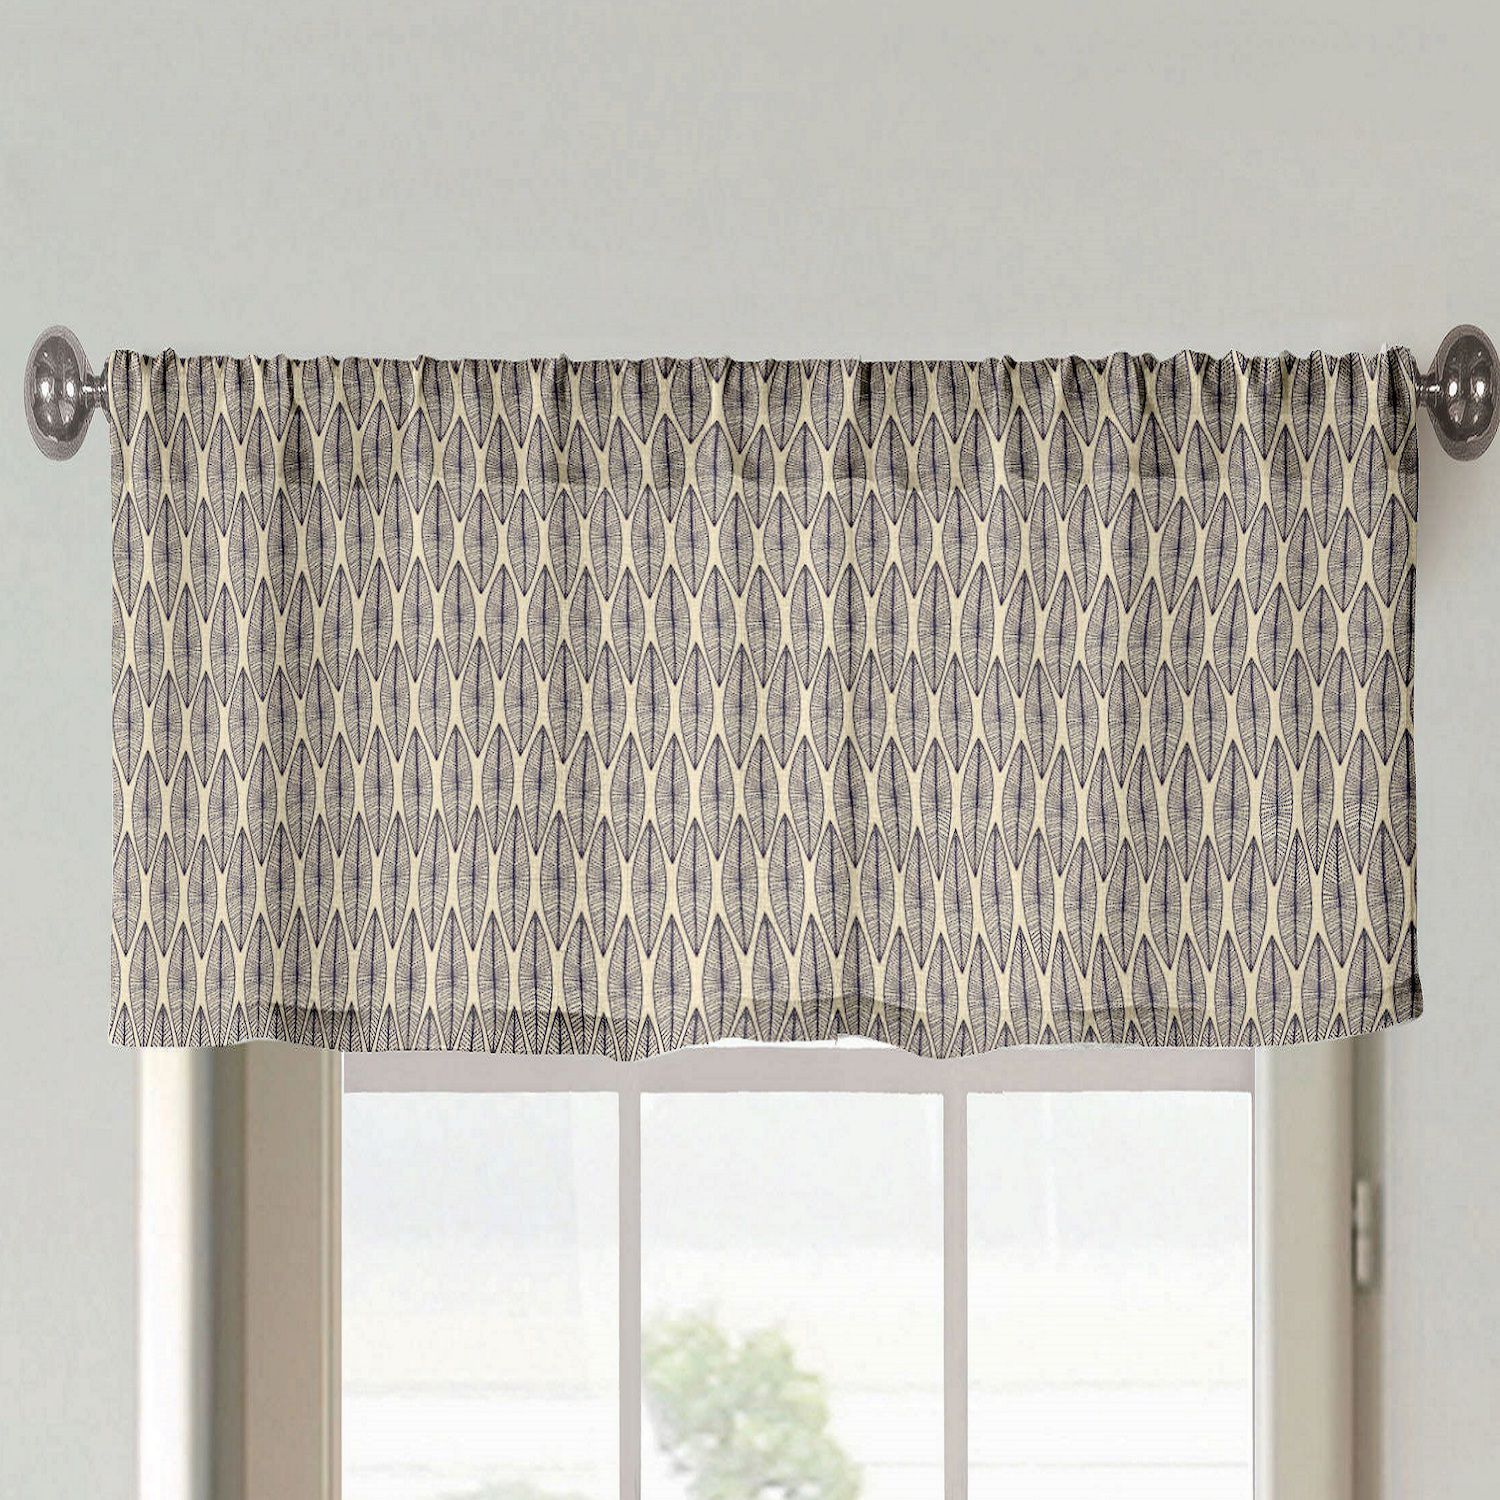 Image for Duck River Textile Florina Geometric 2-pack Window Curtain Set at Kohl's.